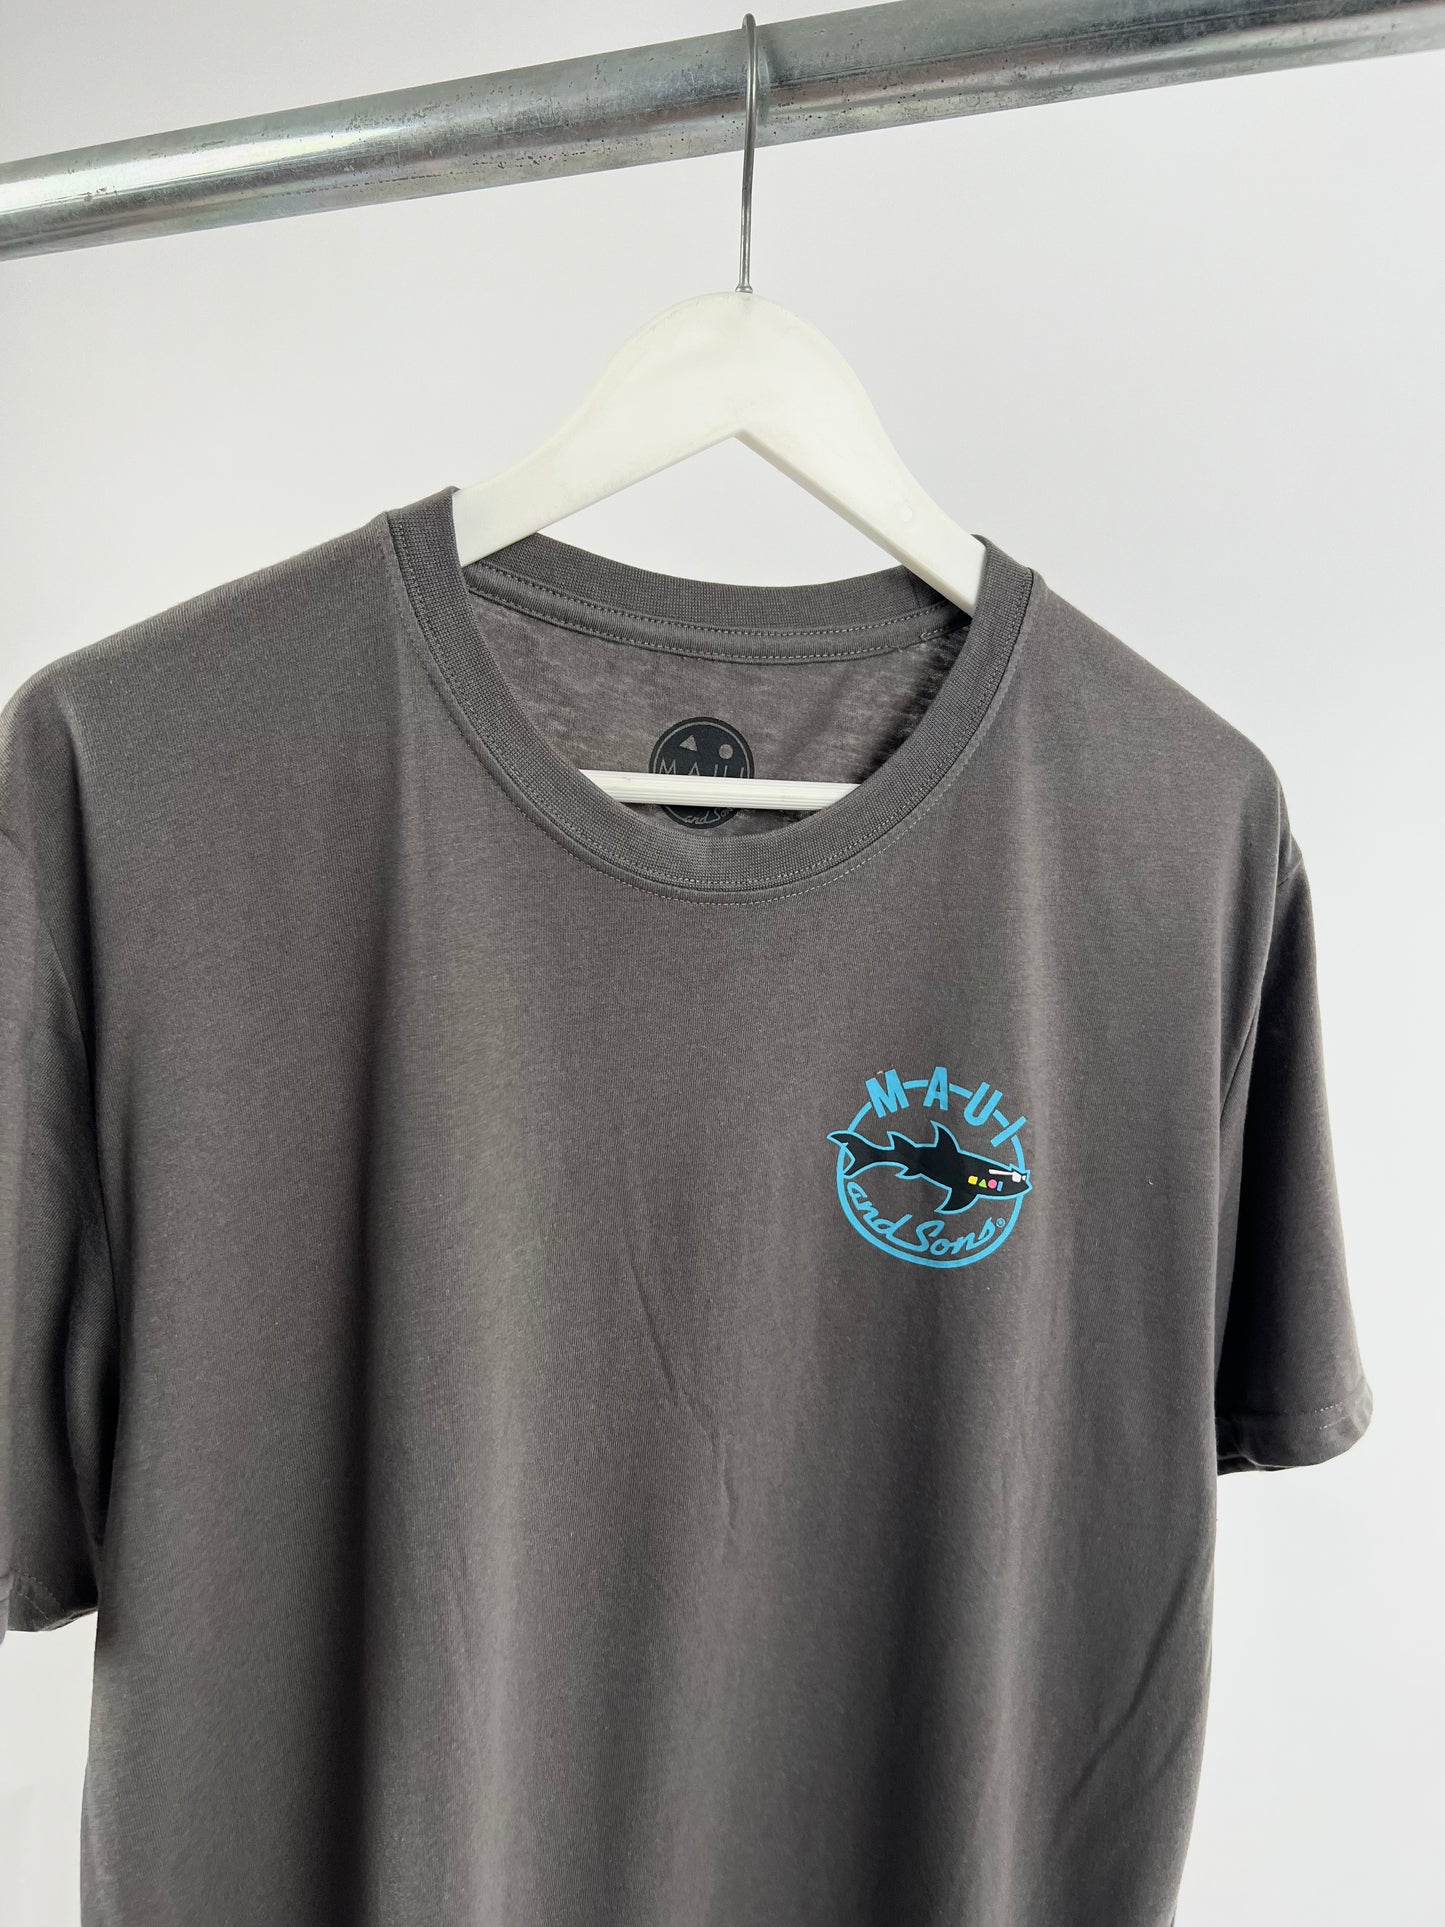 Maui and Sons backprint t-shirt in grey